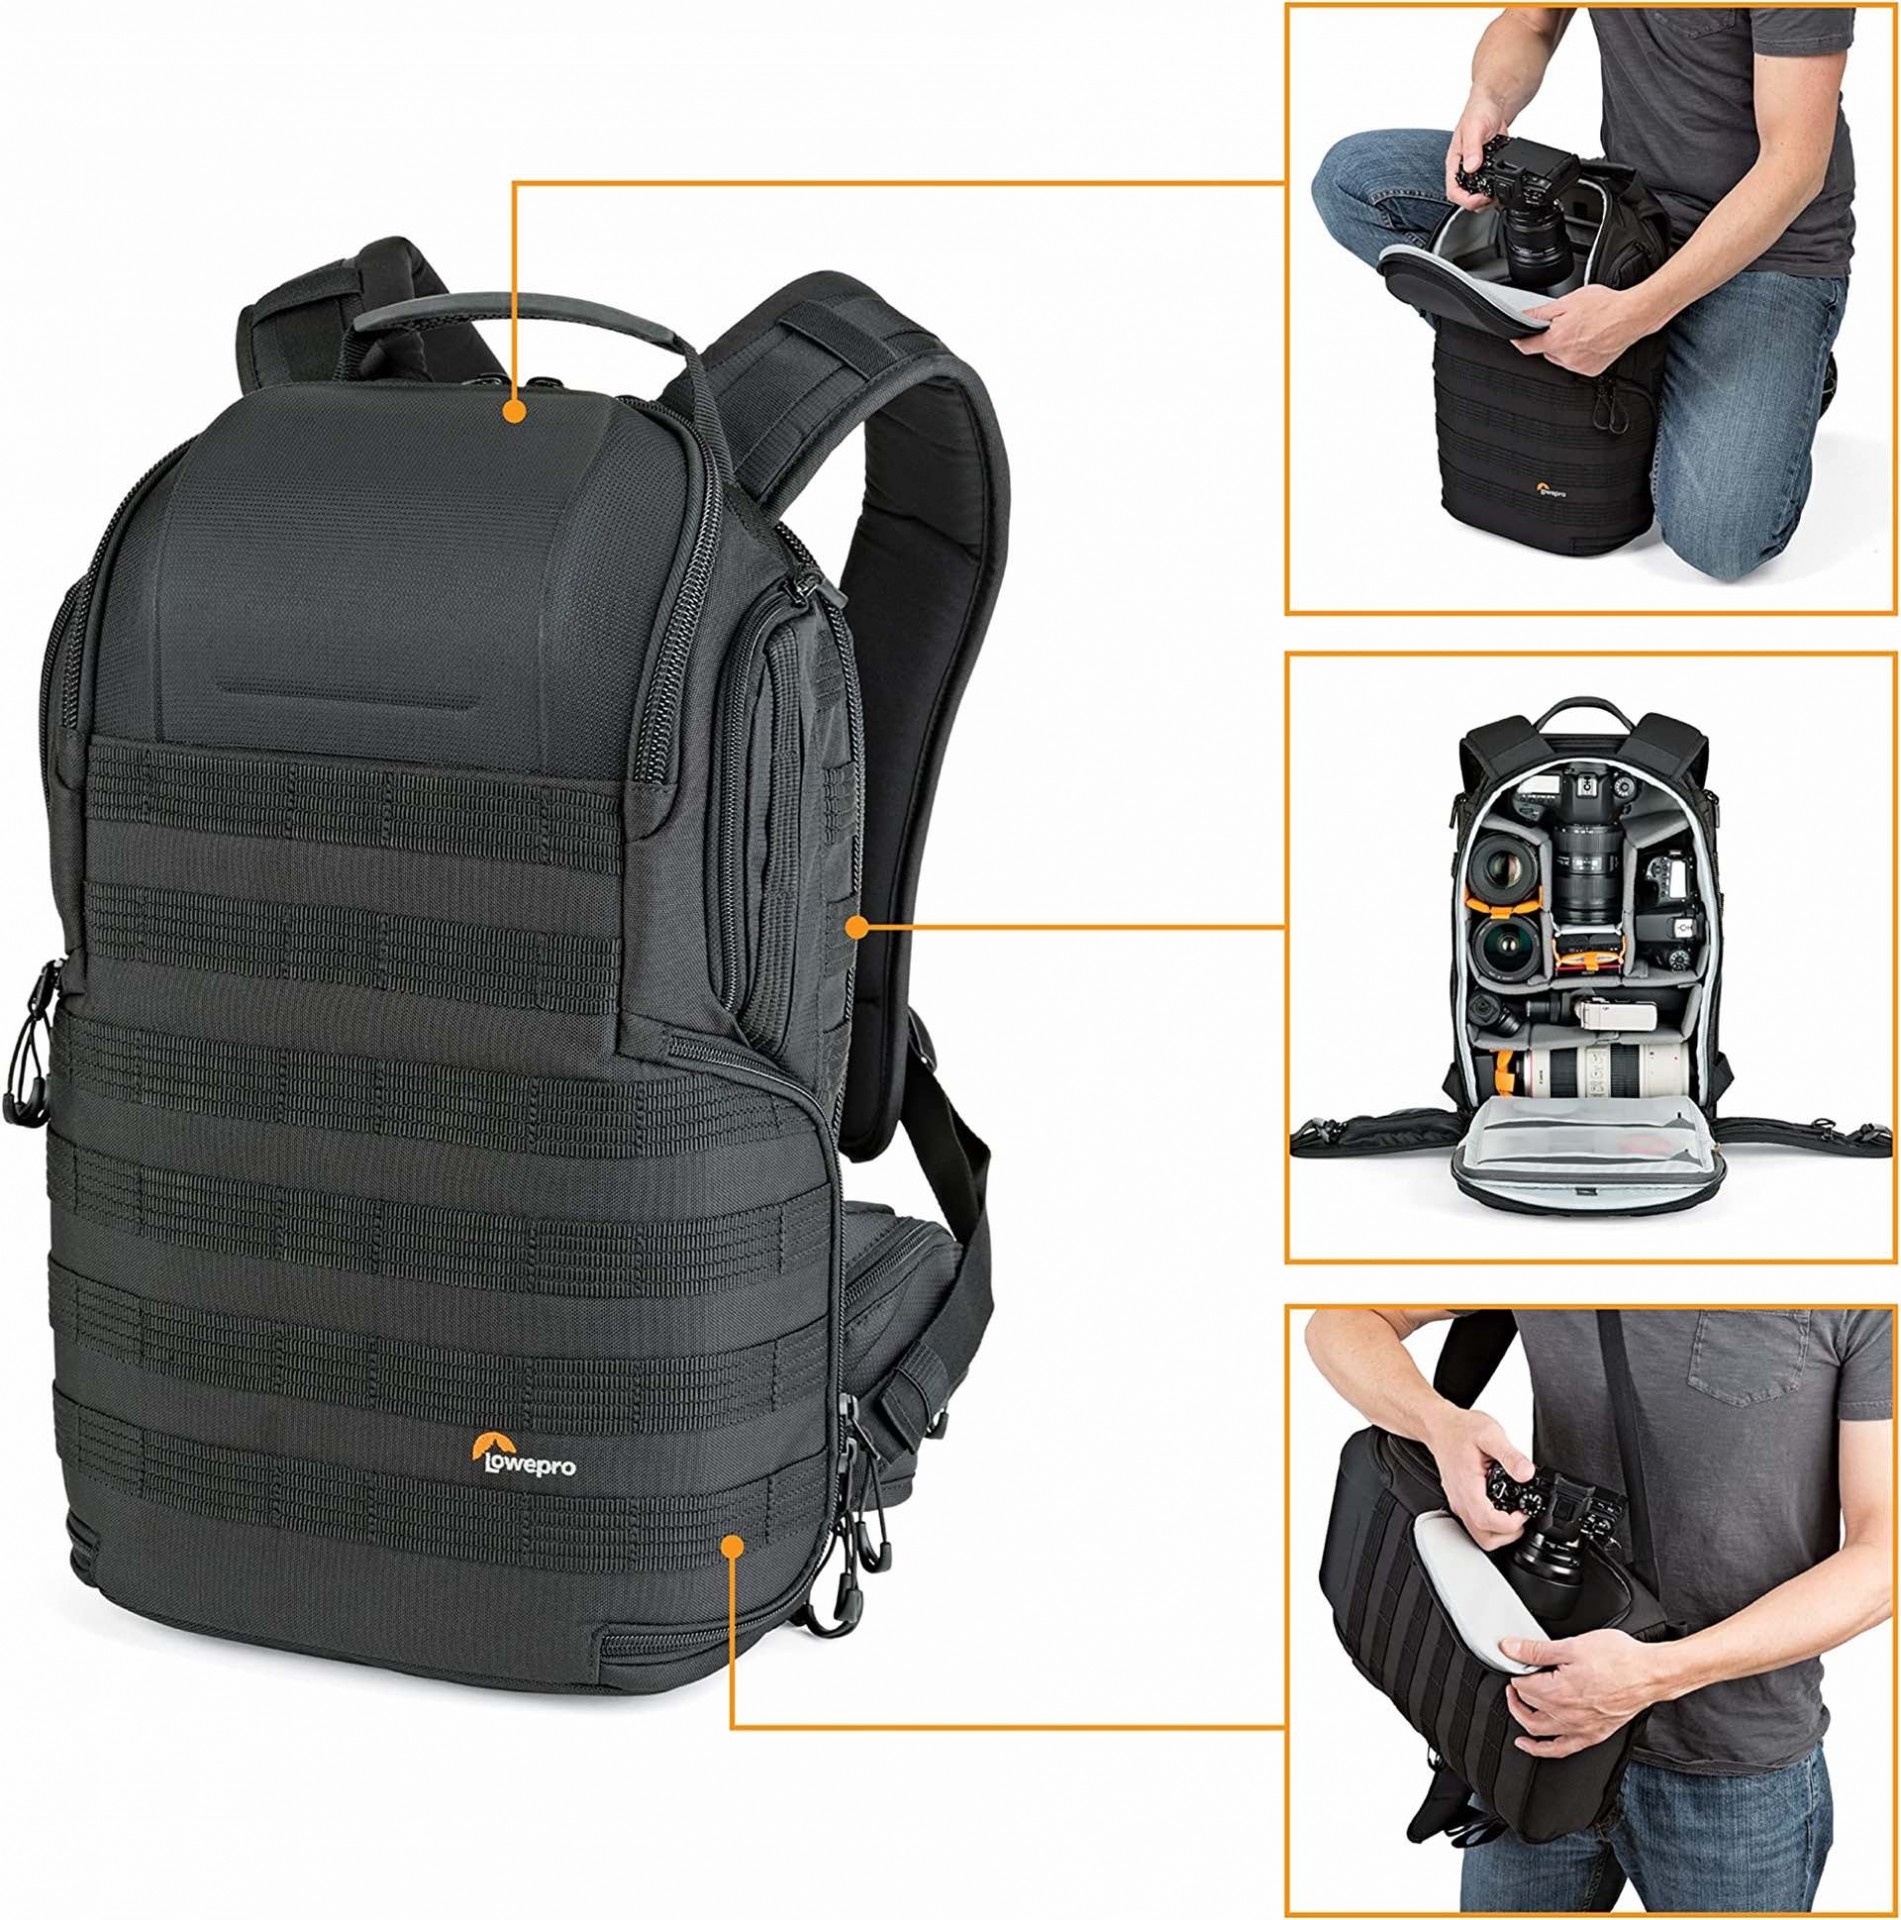 lowepro-protactic-350-aw-ii-professional-modular-camera-backpack-access-points